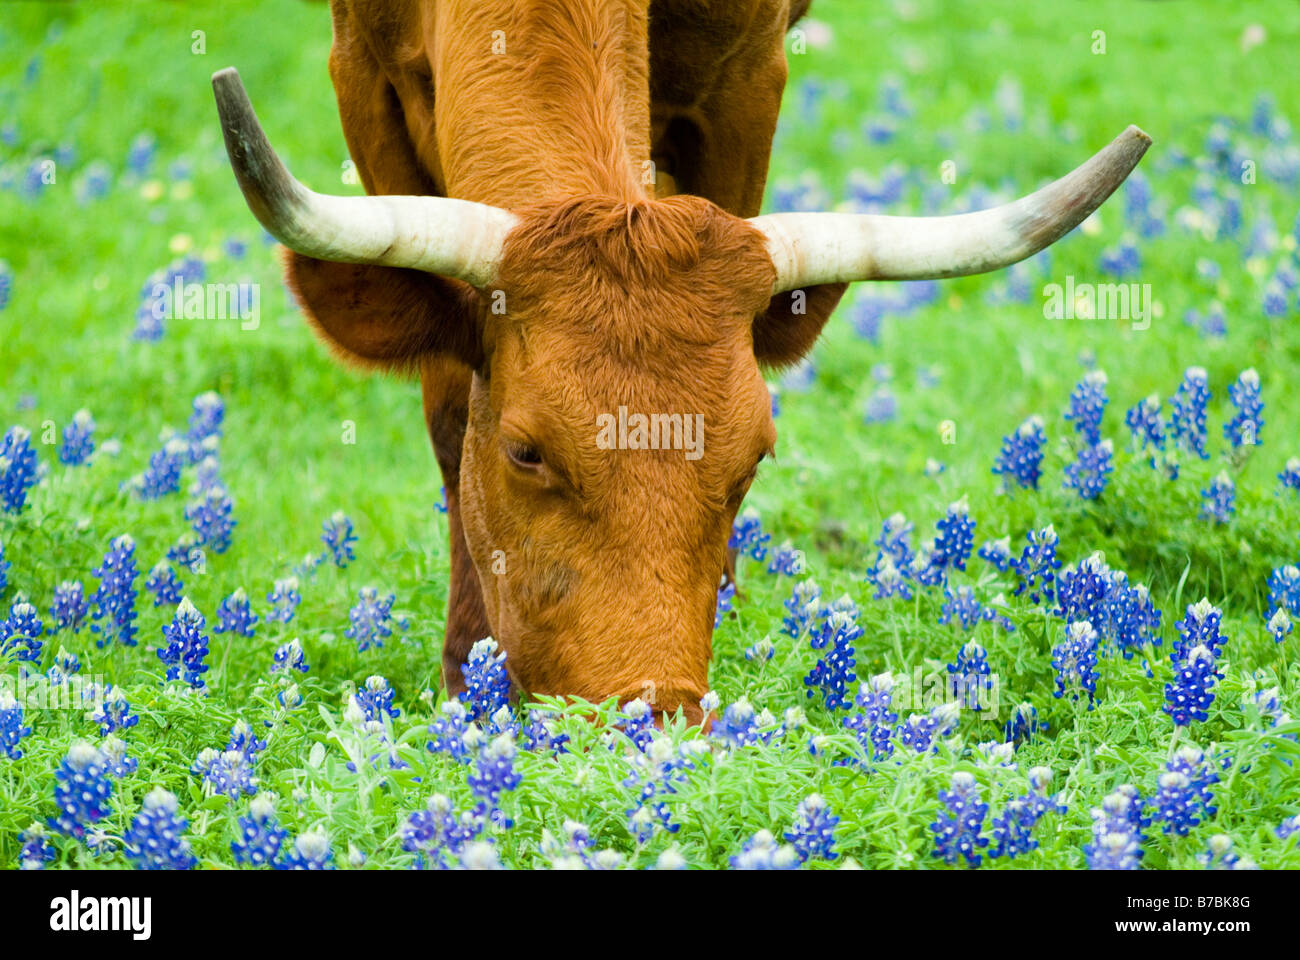 Horned bovine grazing peacefully with lovely Bluebonnet flowers peppered though out the green grass Stock Photo